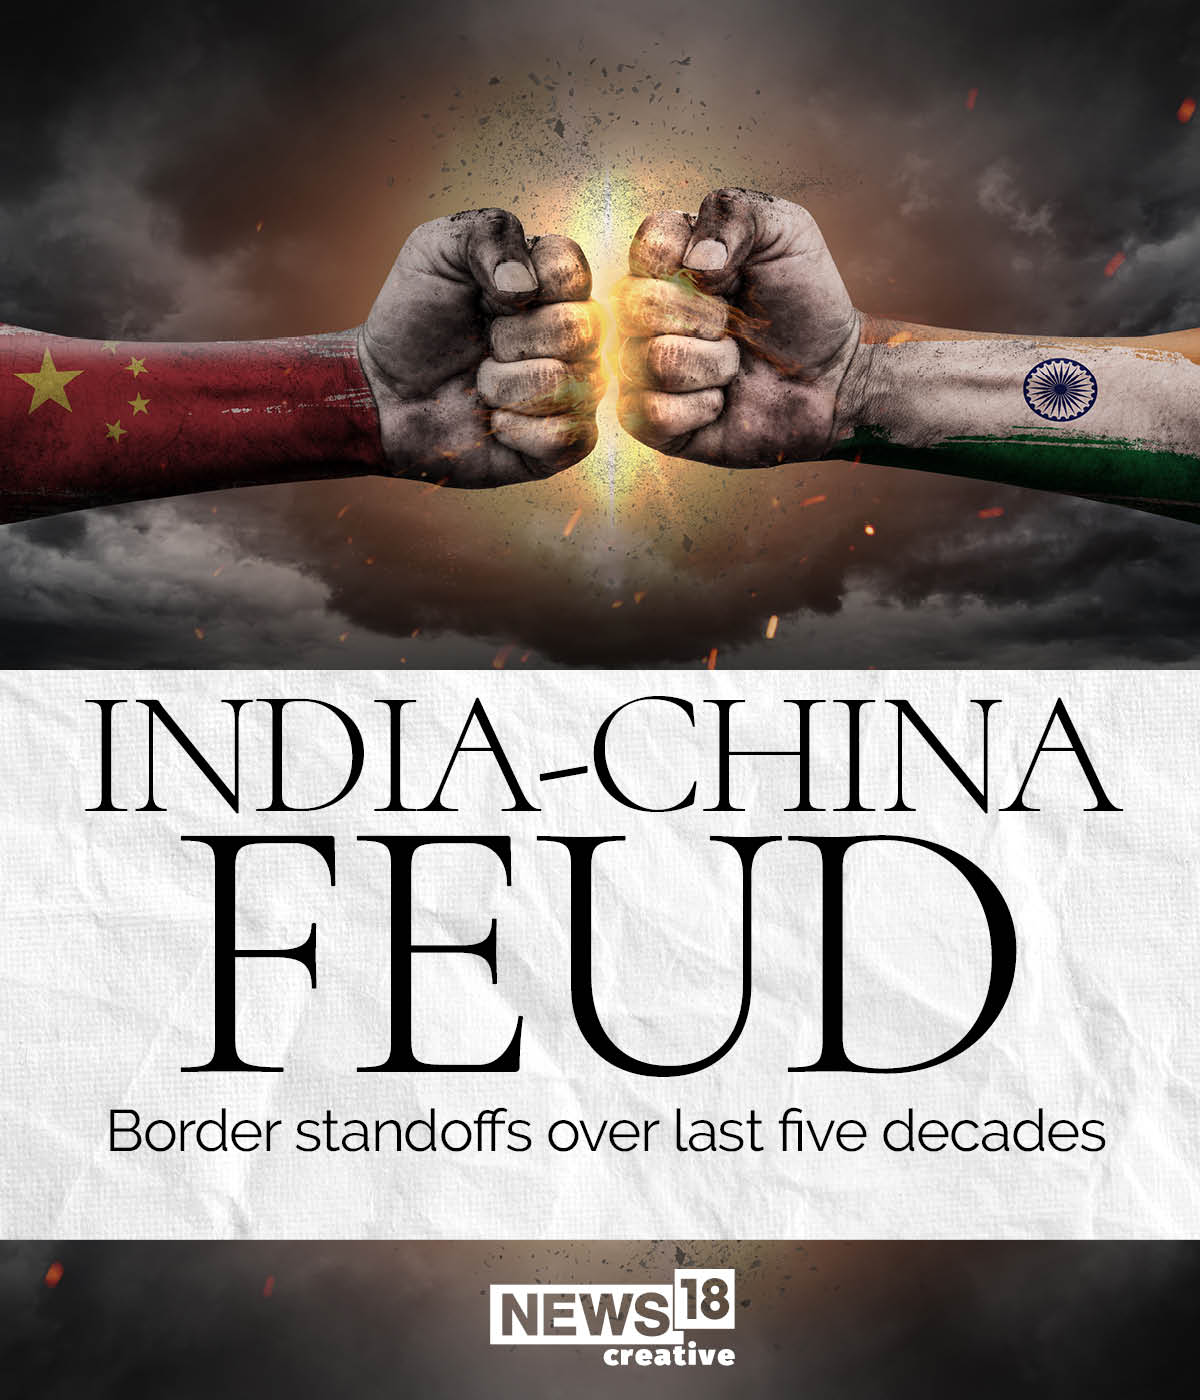 India-China feuds over the past fifty years